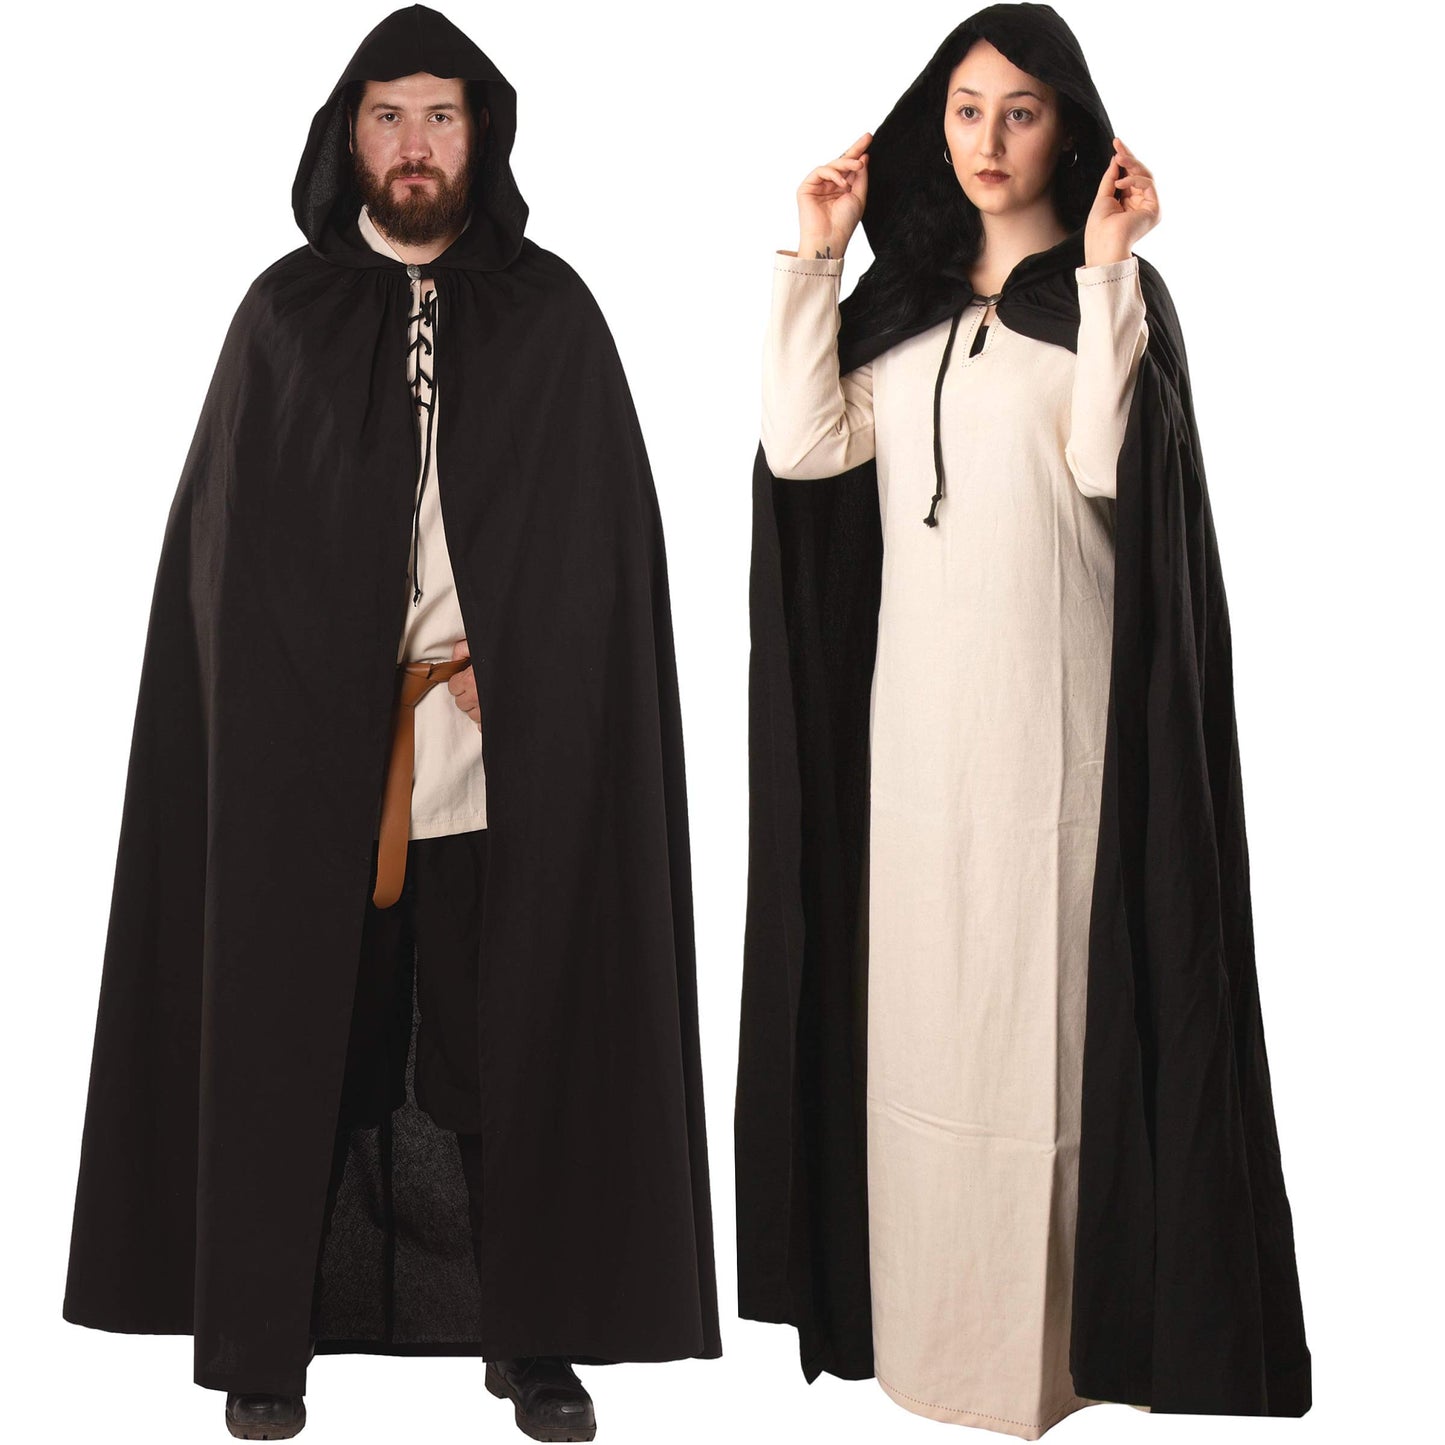 Norse Merchant Medieval Hooded Viking Cape